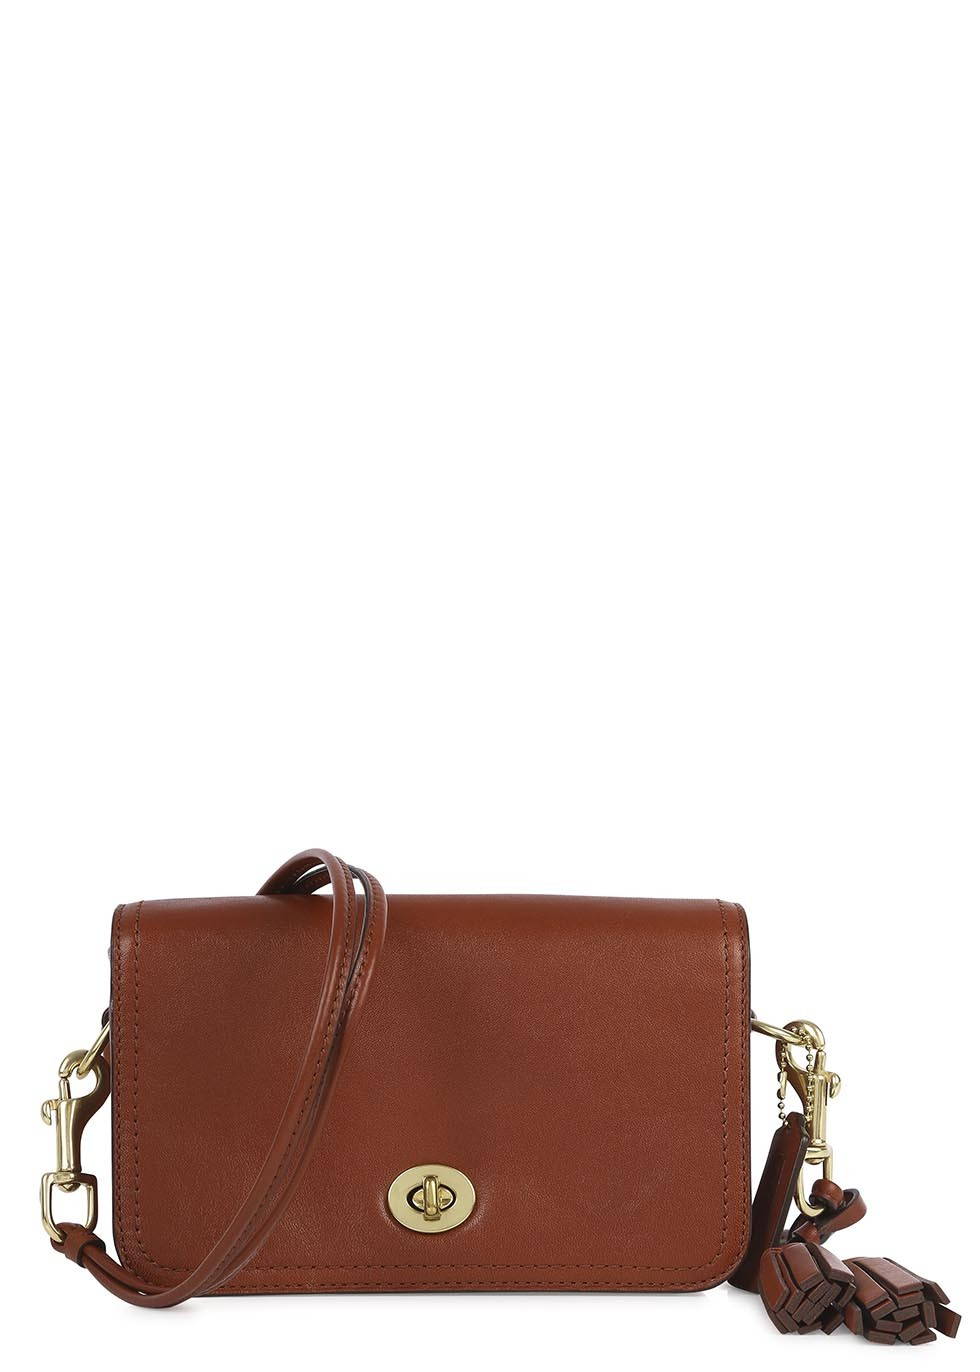 Coach Penny Brown Leather Shoulder Bag in Brown | Lyst